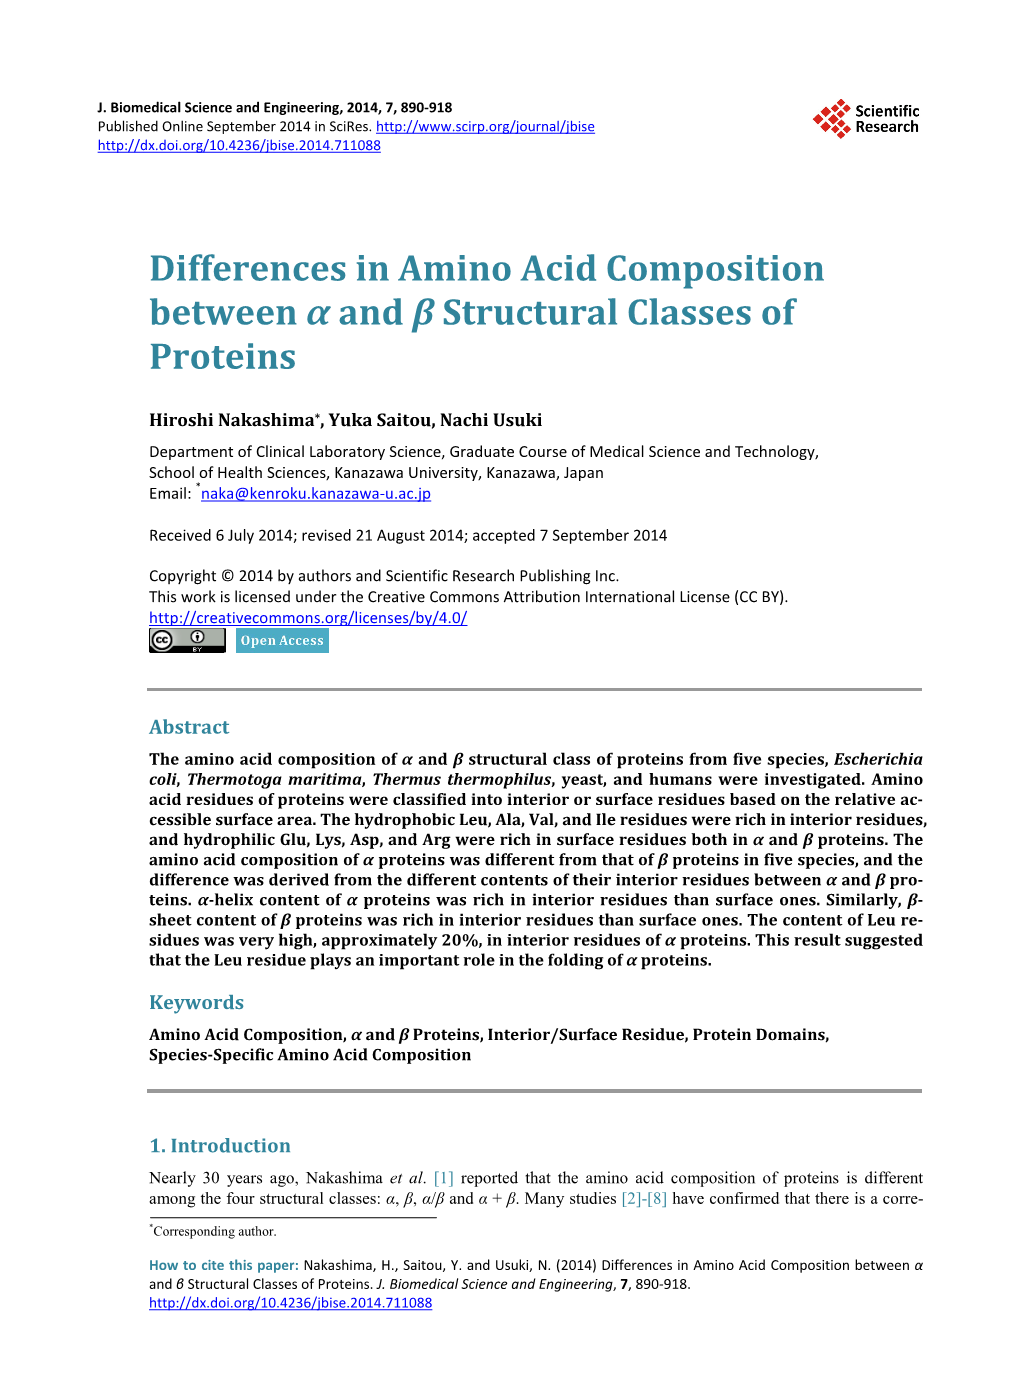 Differences in Amino Acid Composition Between Α and Β Structural Classes of Proteins